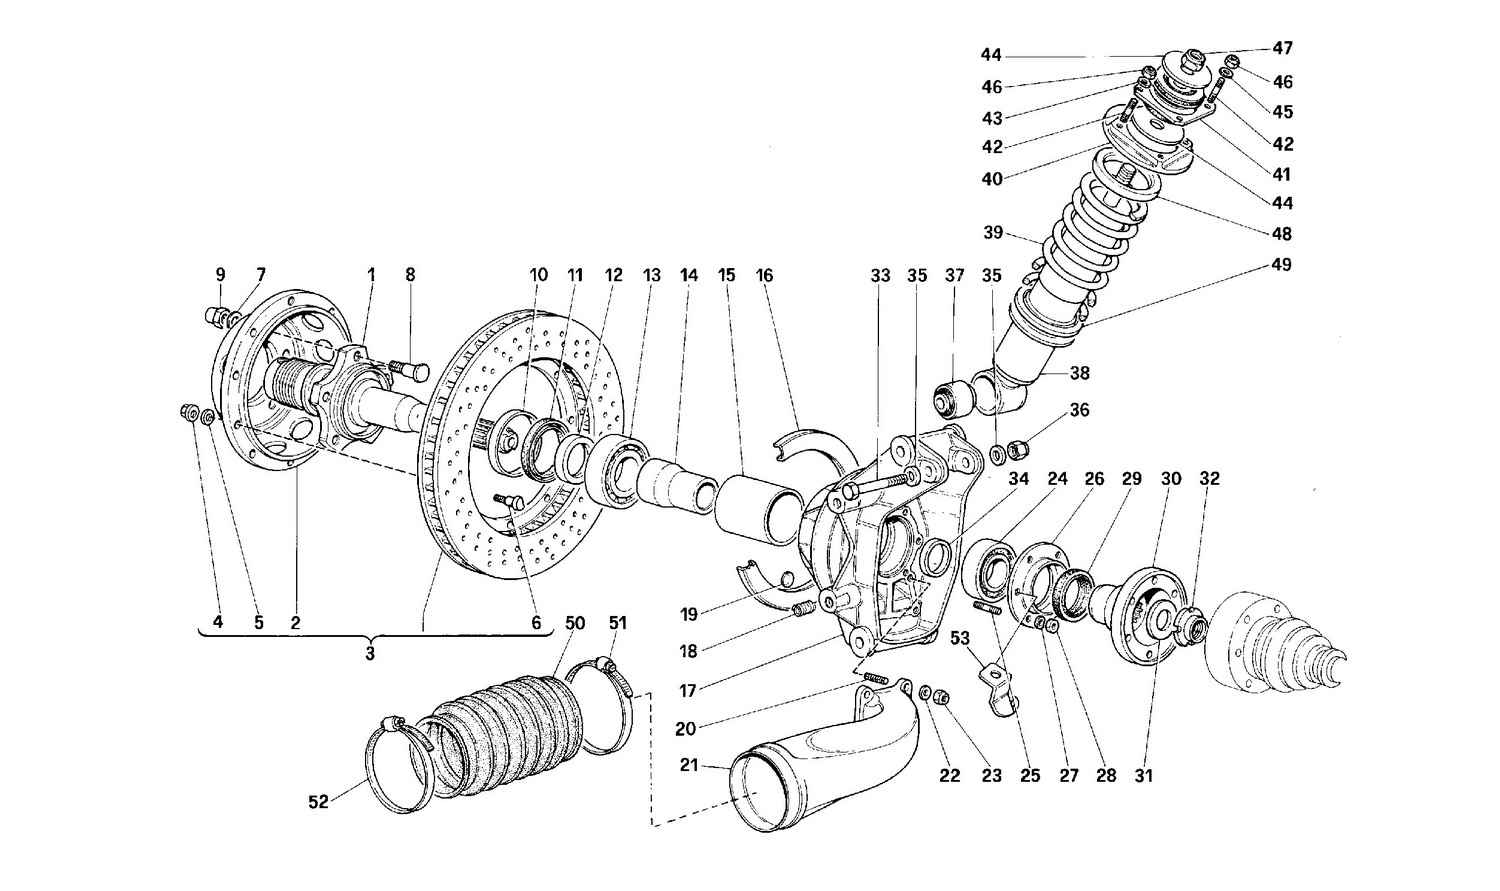 Schematic: Rear Suspension - Shock Absorber And Brake Discs